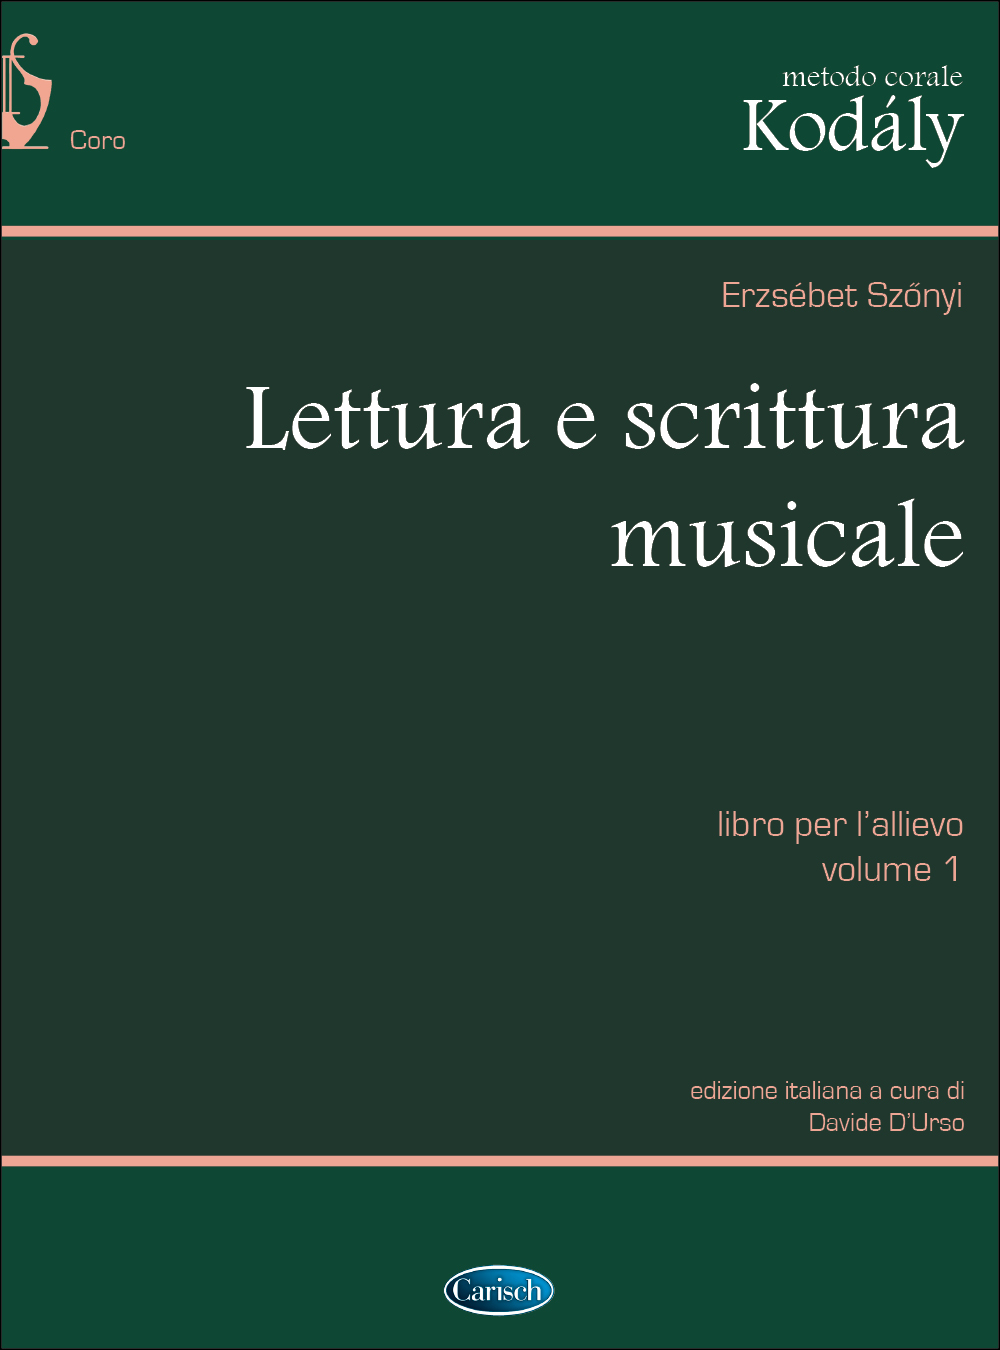 Zoltán Kodály: Lettura E Scrittura Musicale: Theory